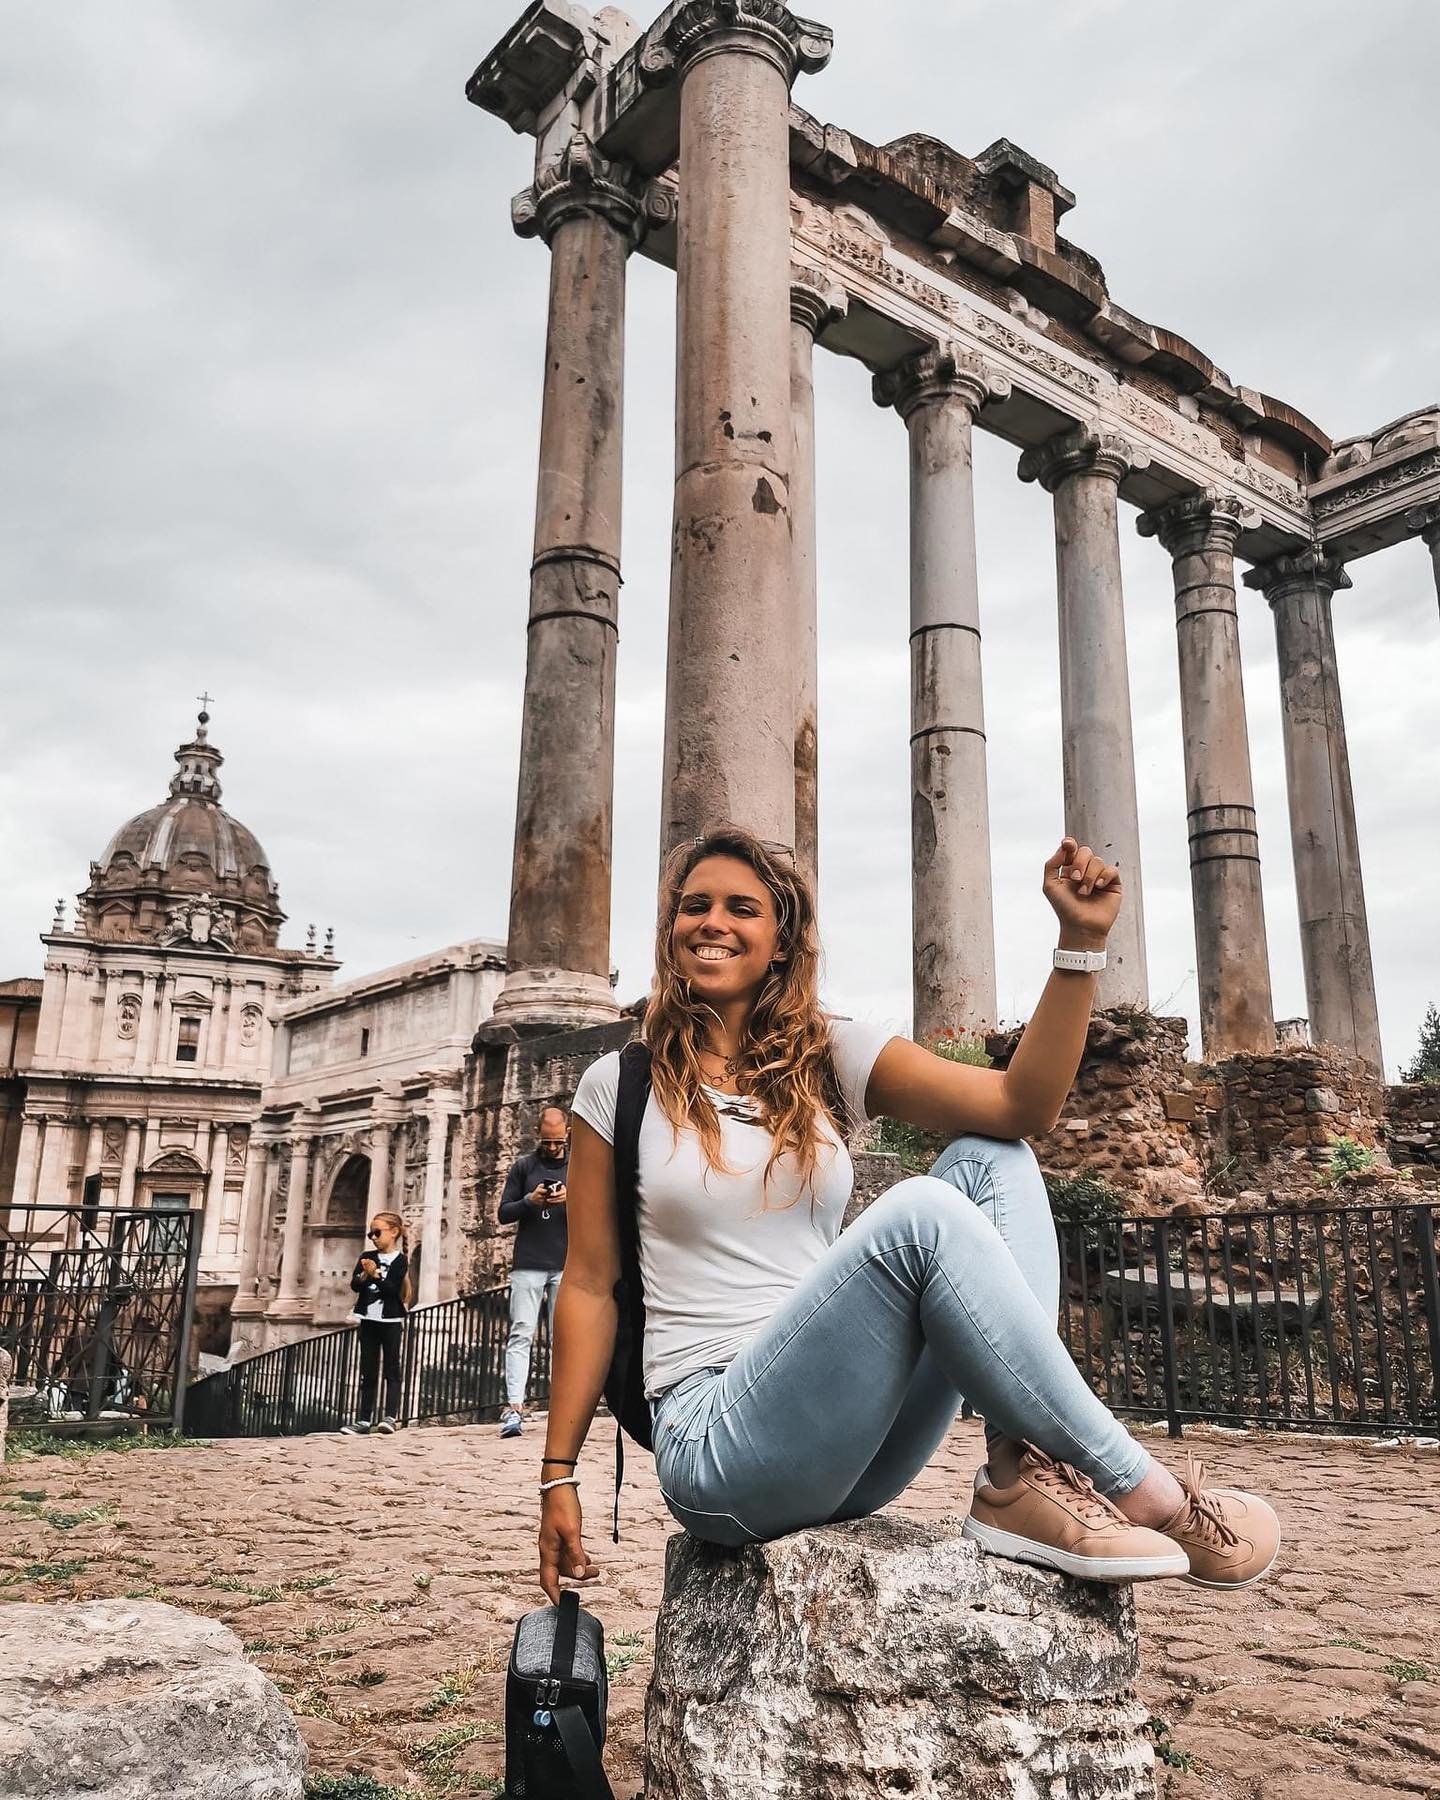 🛣 As they say - All roads lead to Rome. Barebarics sneakers are not an exception. Put on your beloved sneakers and step forward to get to know the unknown! 👟